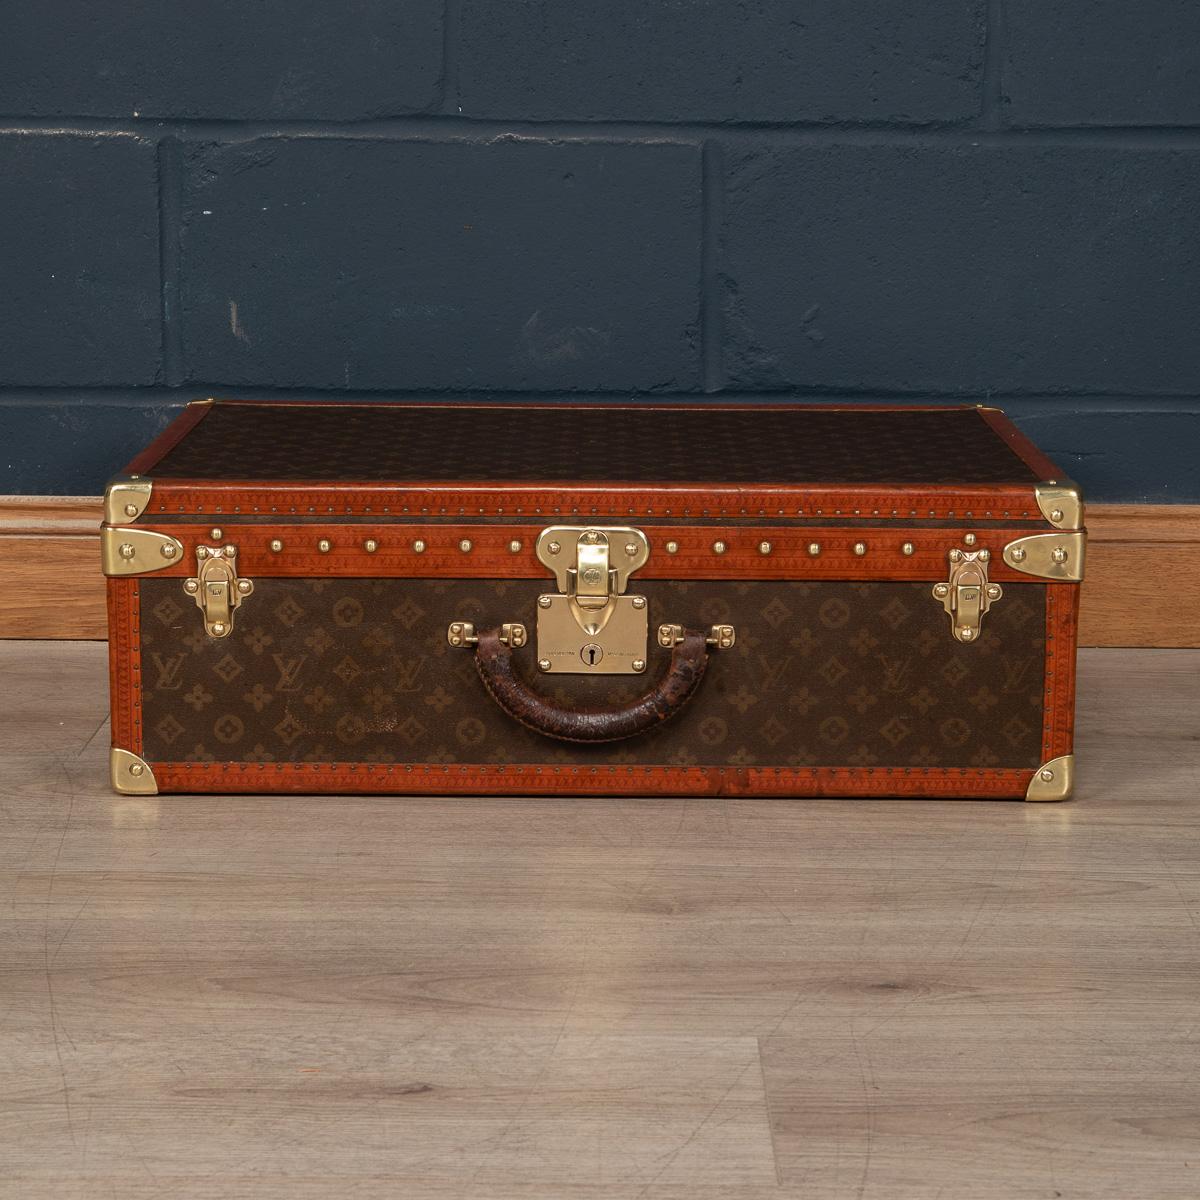 A charming Louis Vuitton hard-sided case, second half of the 20th century, the exterior finished in the famous monogram canvas with brass fittings. A great piece for use today or as an item for the home. With original key.

CONDITION
In Great